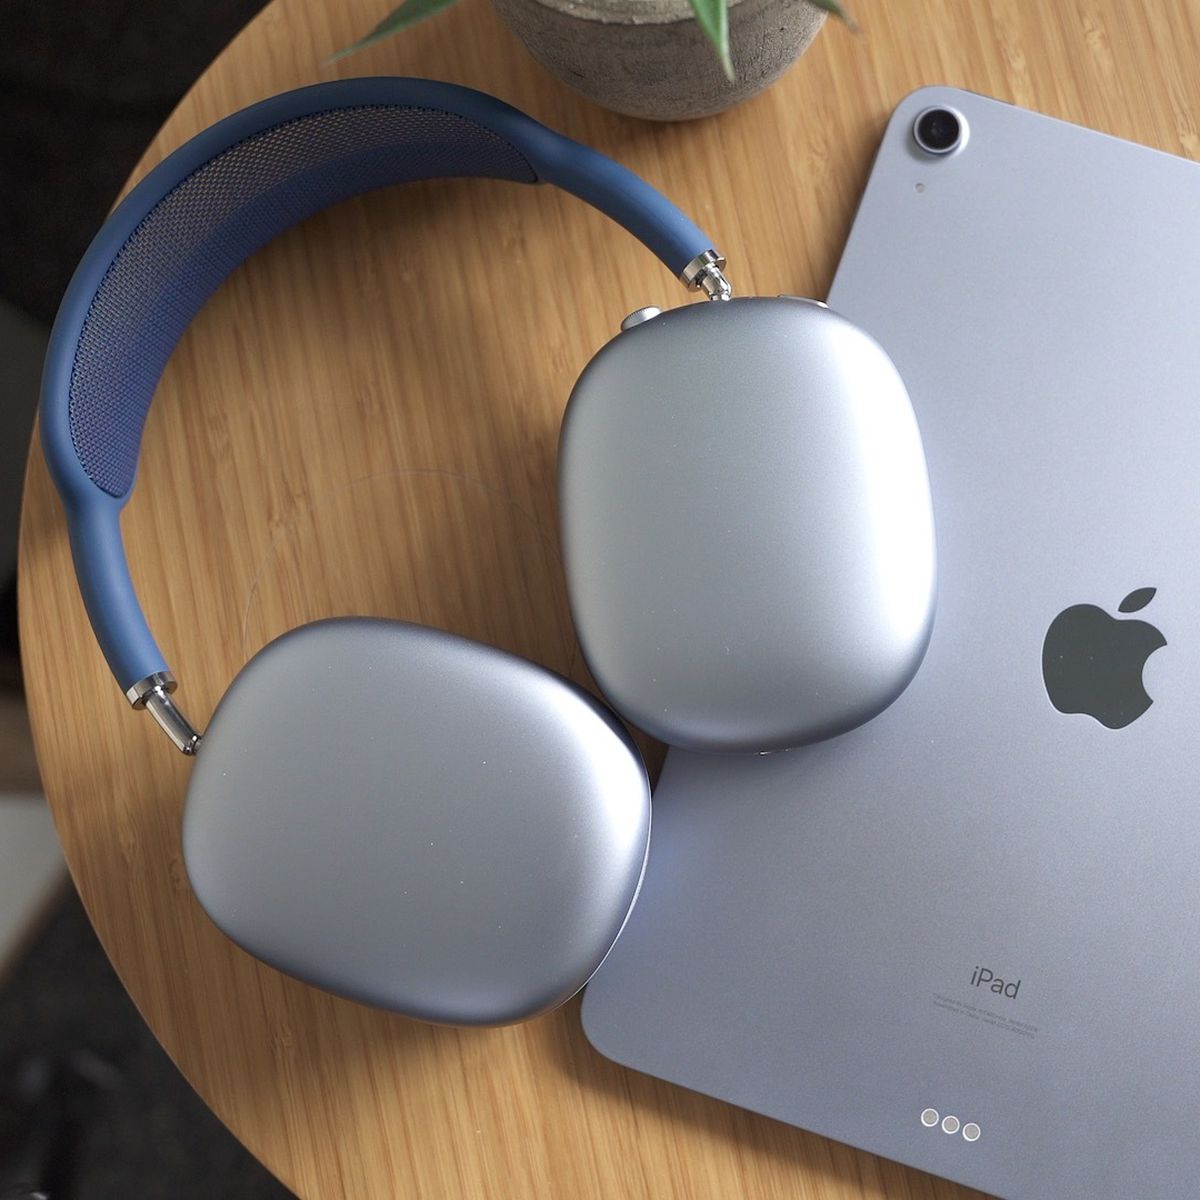 Apple's $549 AirPods Max headphones offer big sound and bugs